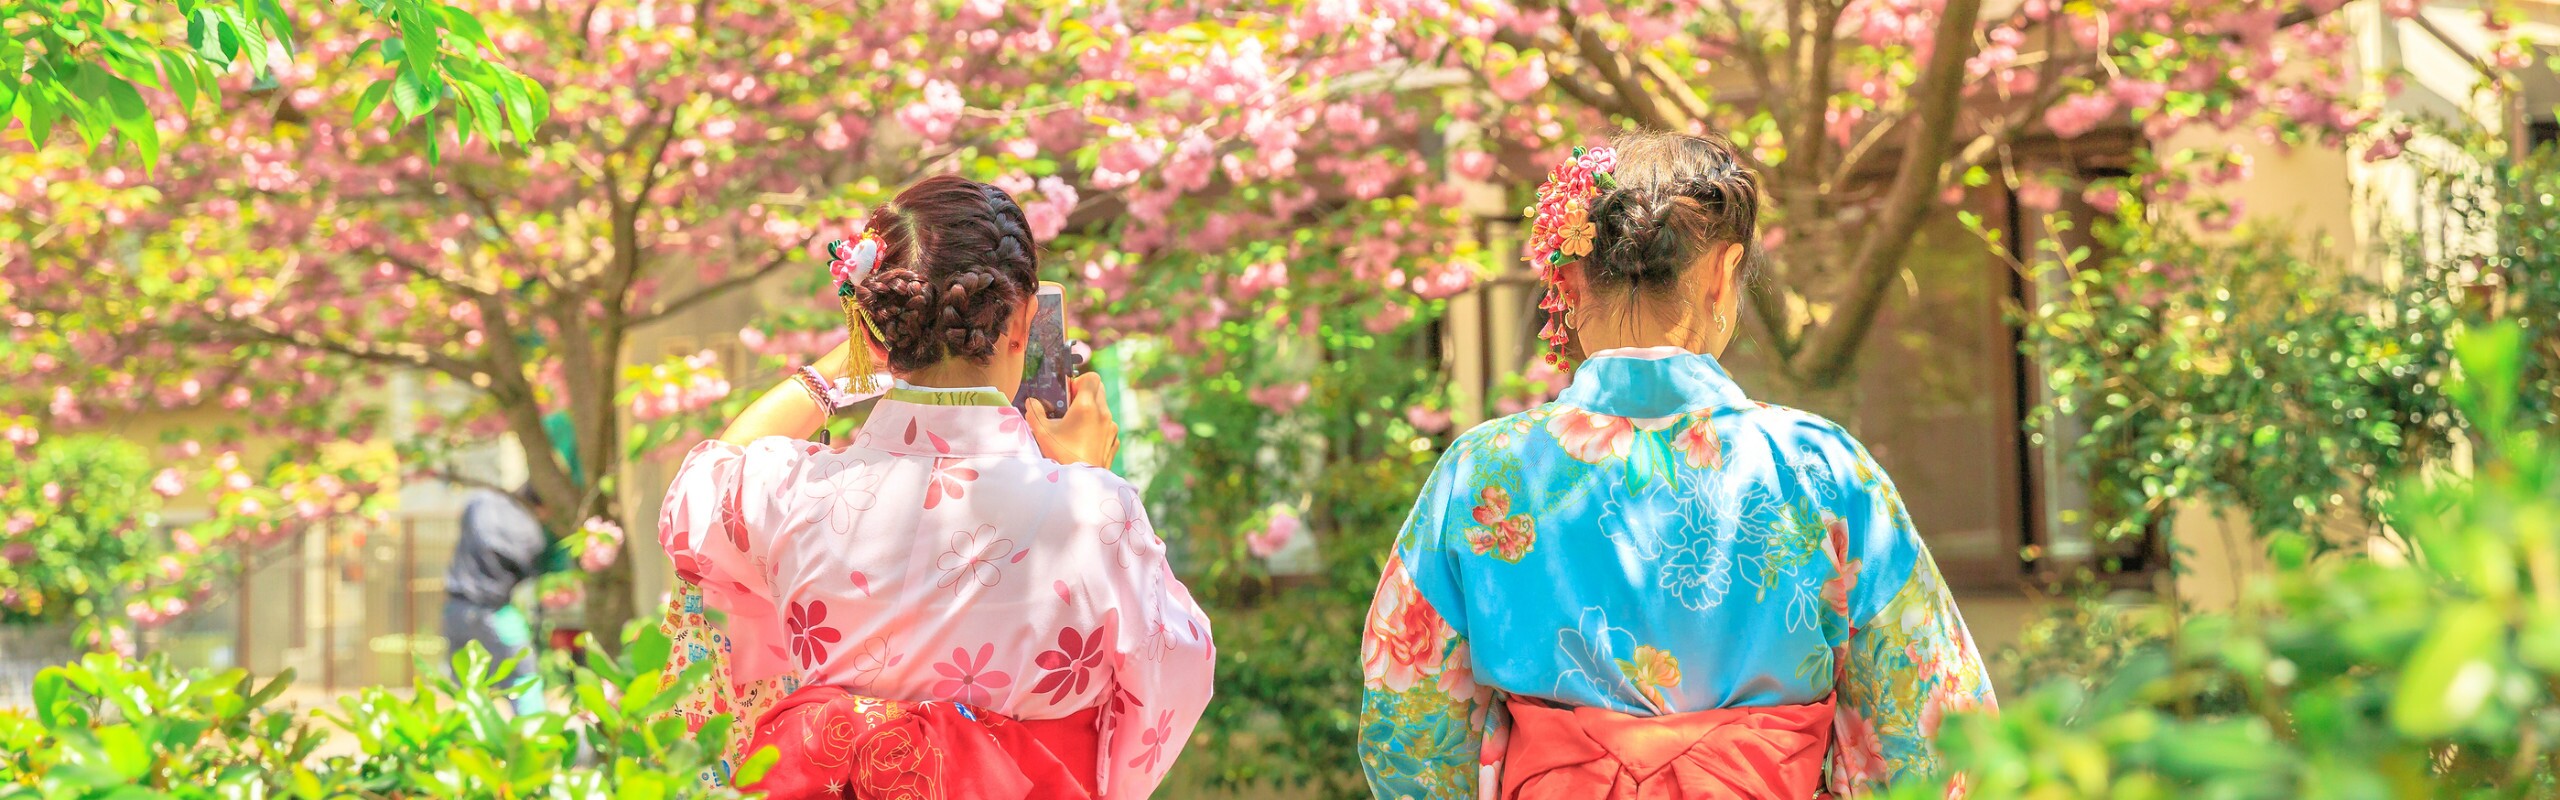 How to Plan a Cherry Blossom Trip to Japan